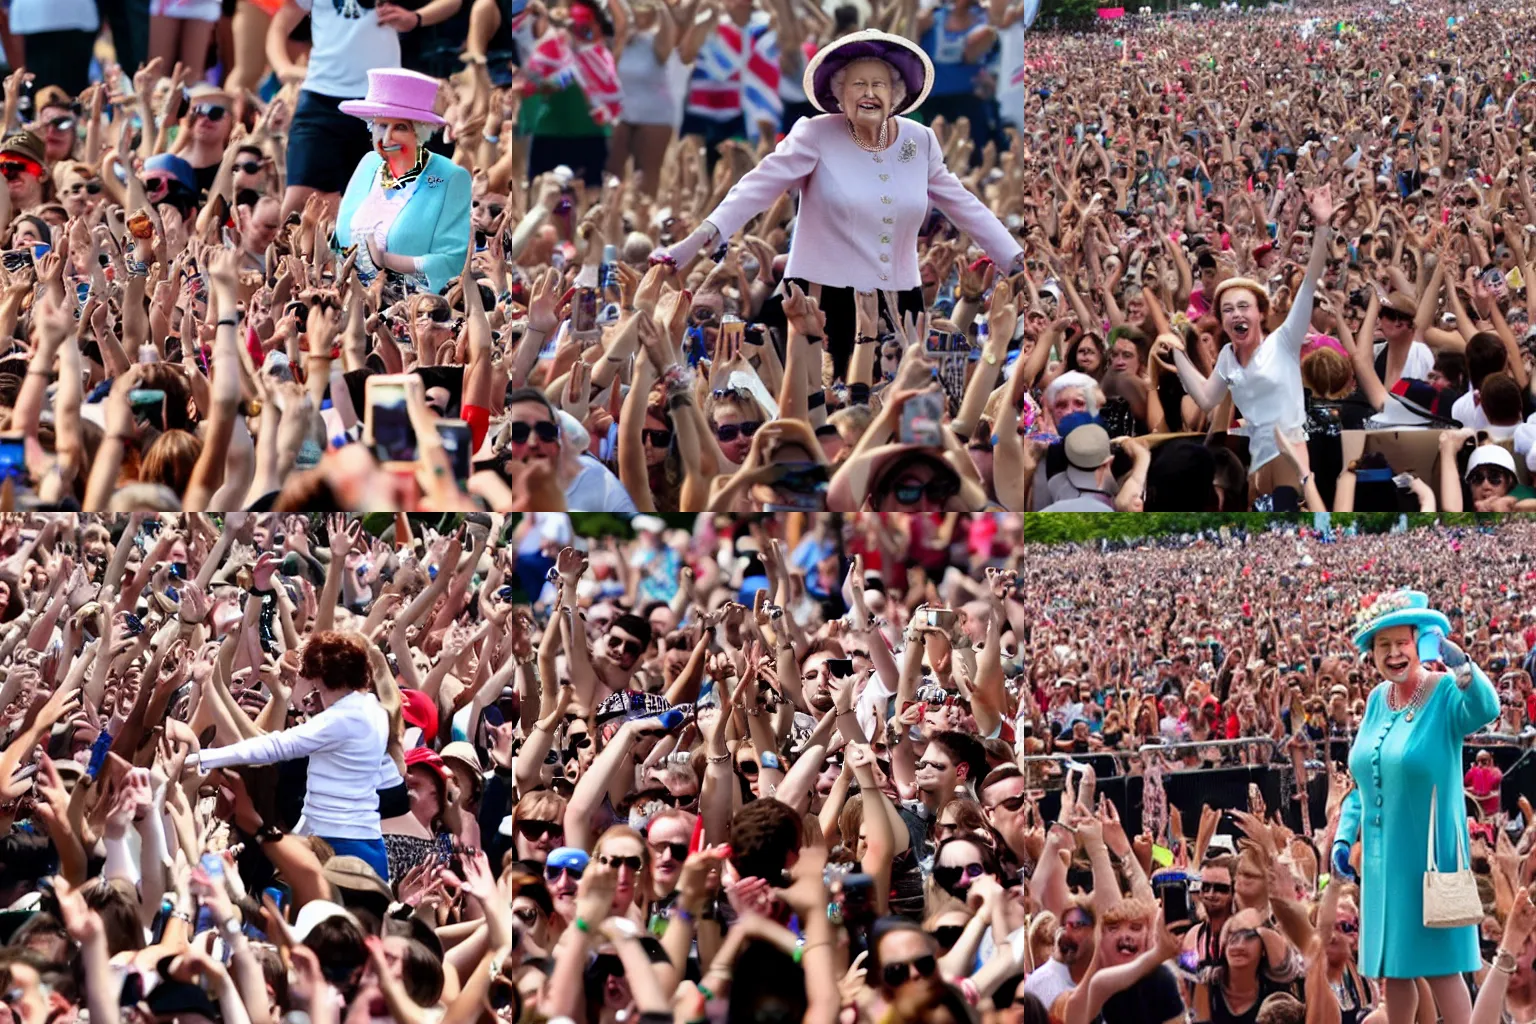 Prompt: Queen Elizabeth cheering in the middle of a crowd in Lollapalooza